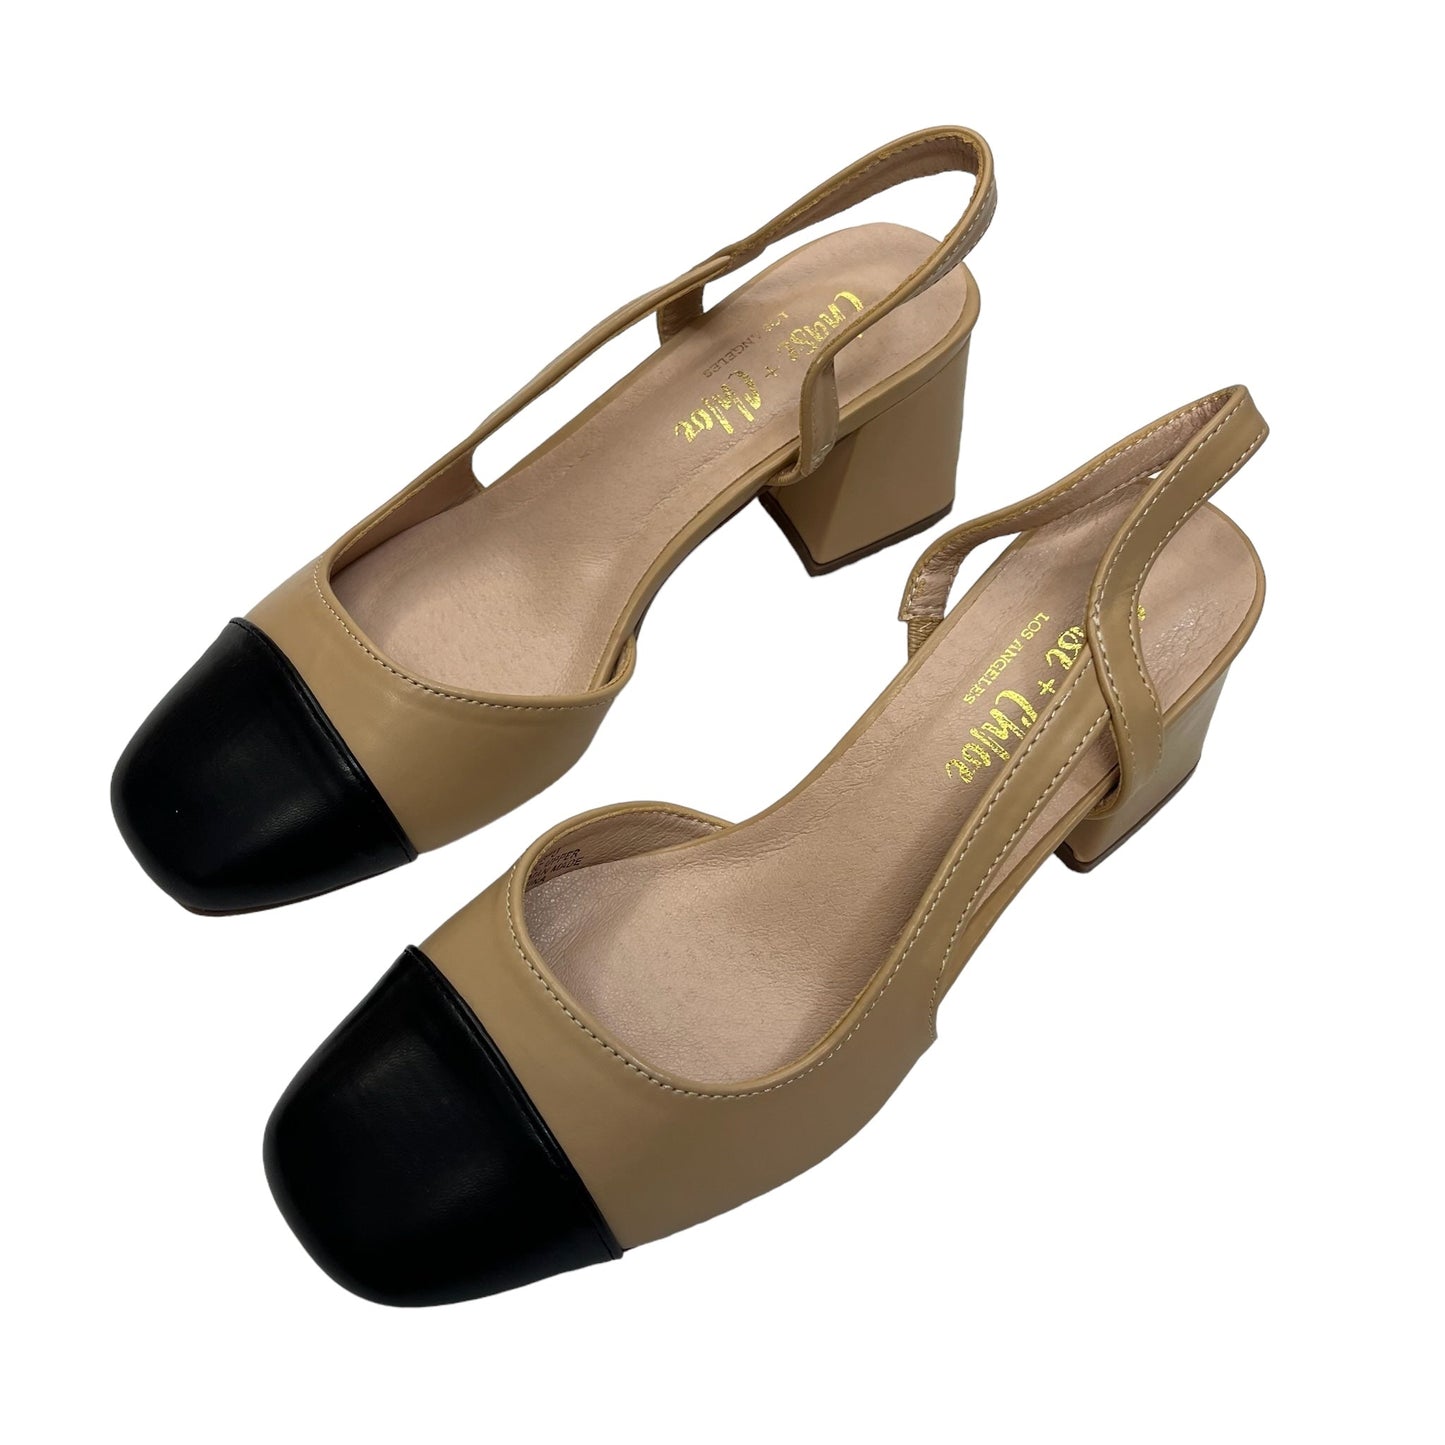 Nude Shoes Heels Block Cmf, Size 7